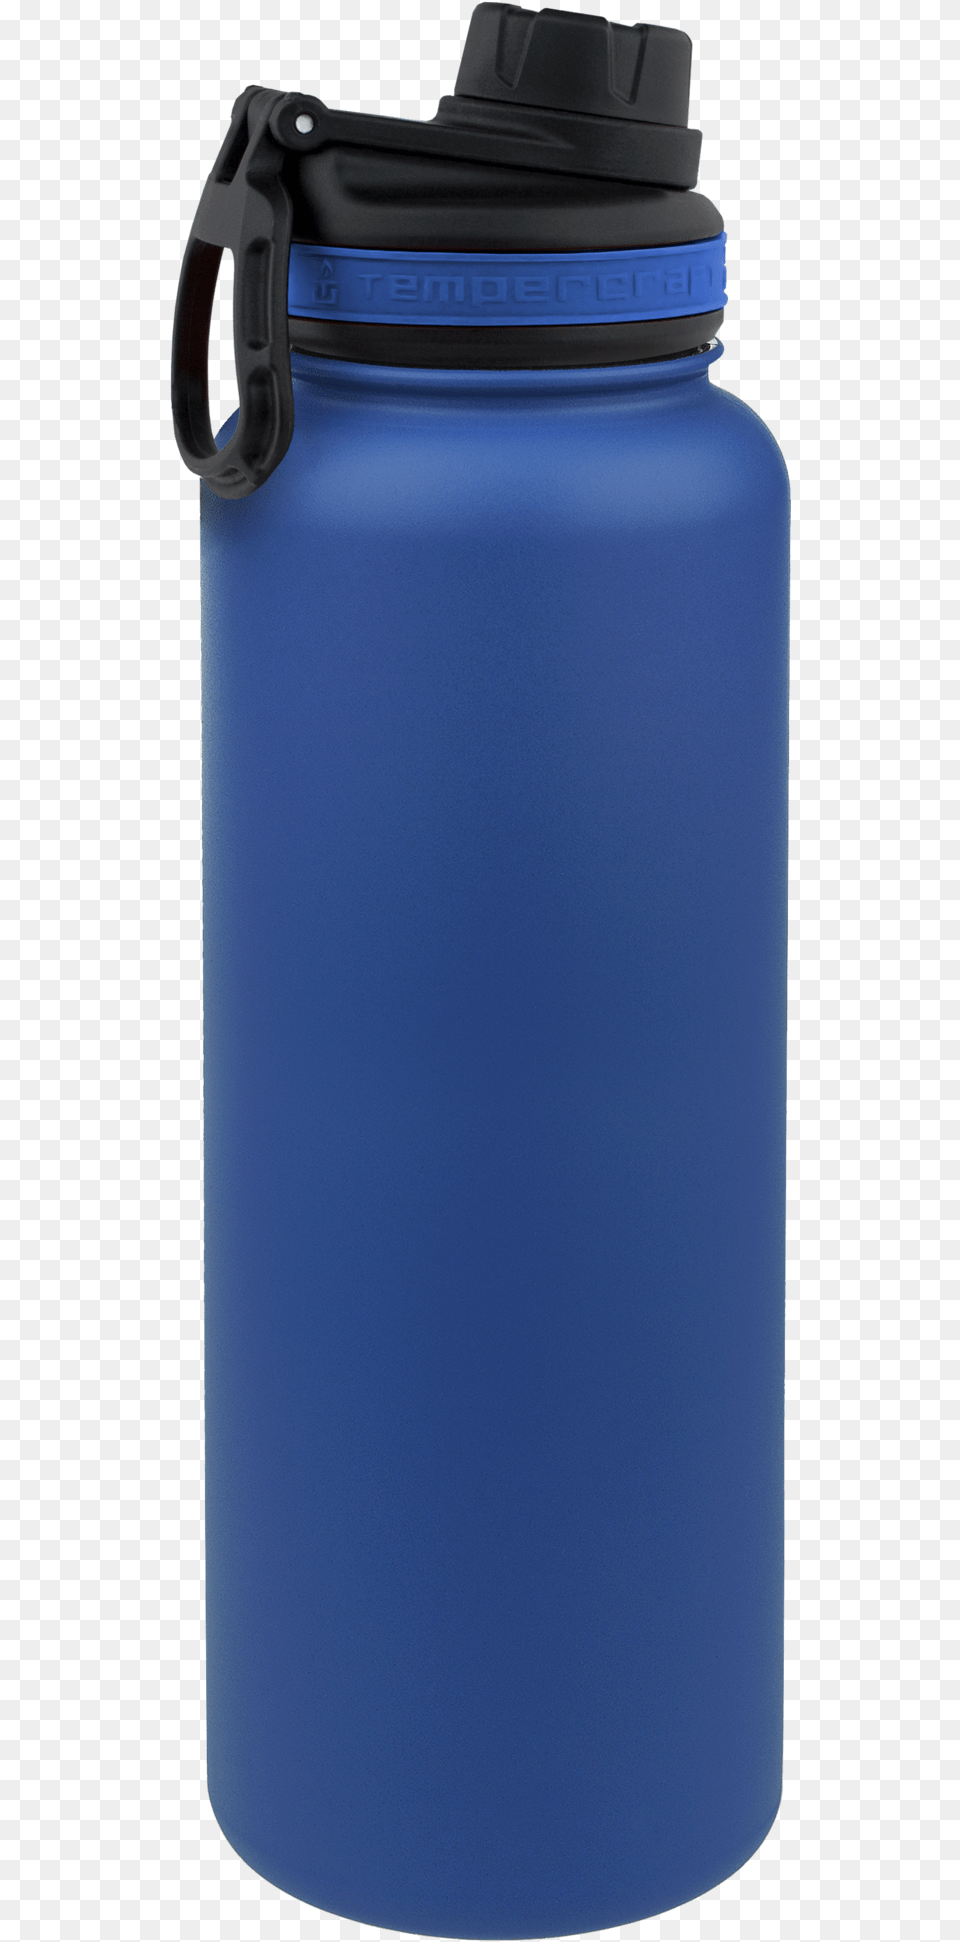 Tempercraftclass Lazyload Lazyload Fade In Cloudzoom Water Bottle, Water Bottle Png Image